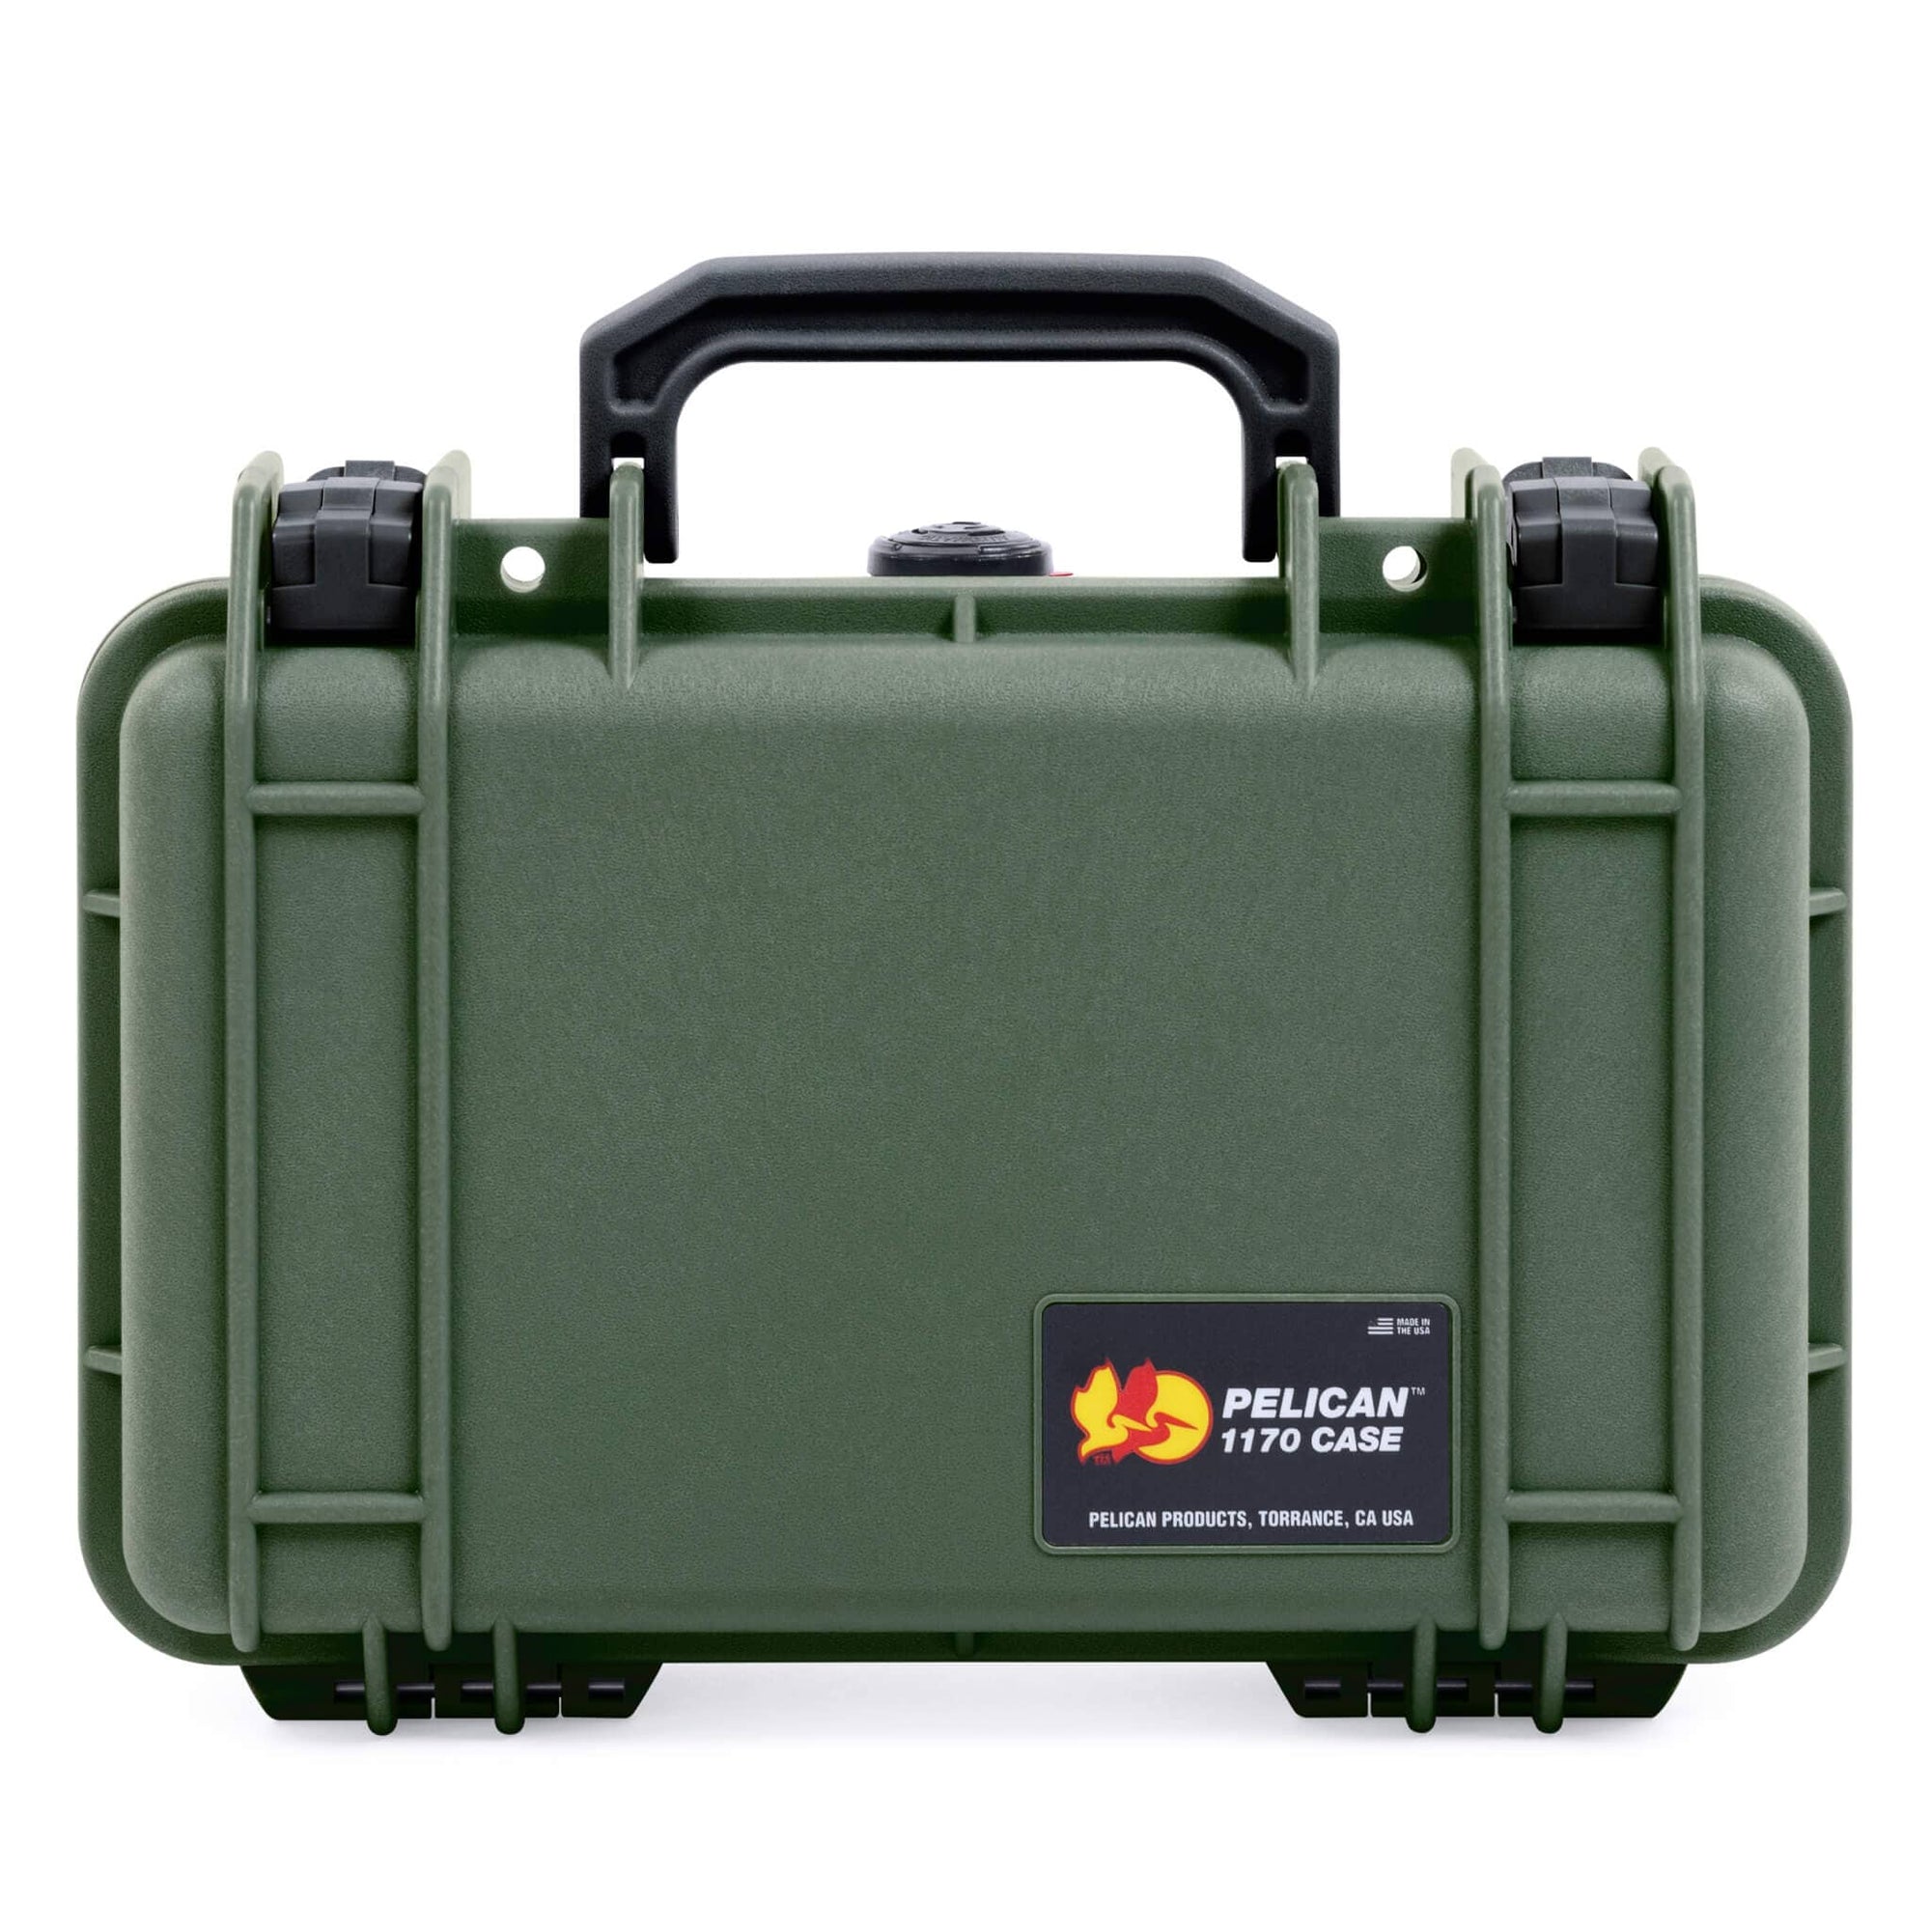 Pelican 1170 Case, OD Green with Black Handle & Latches ColorCase 